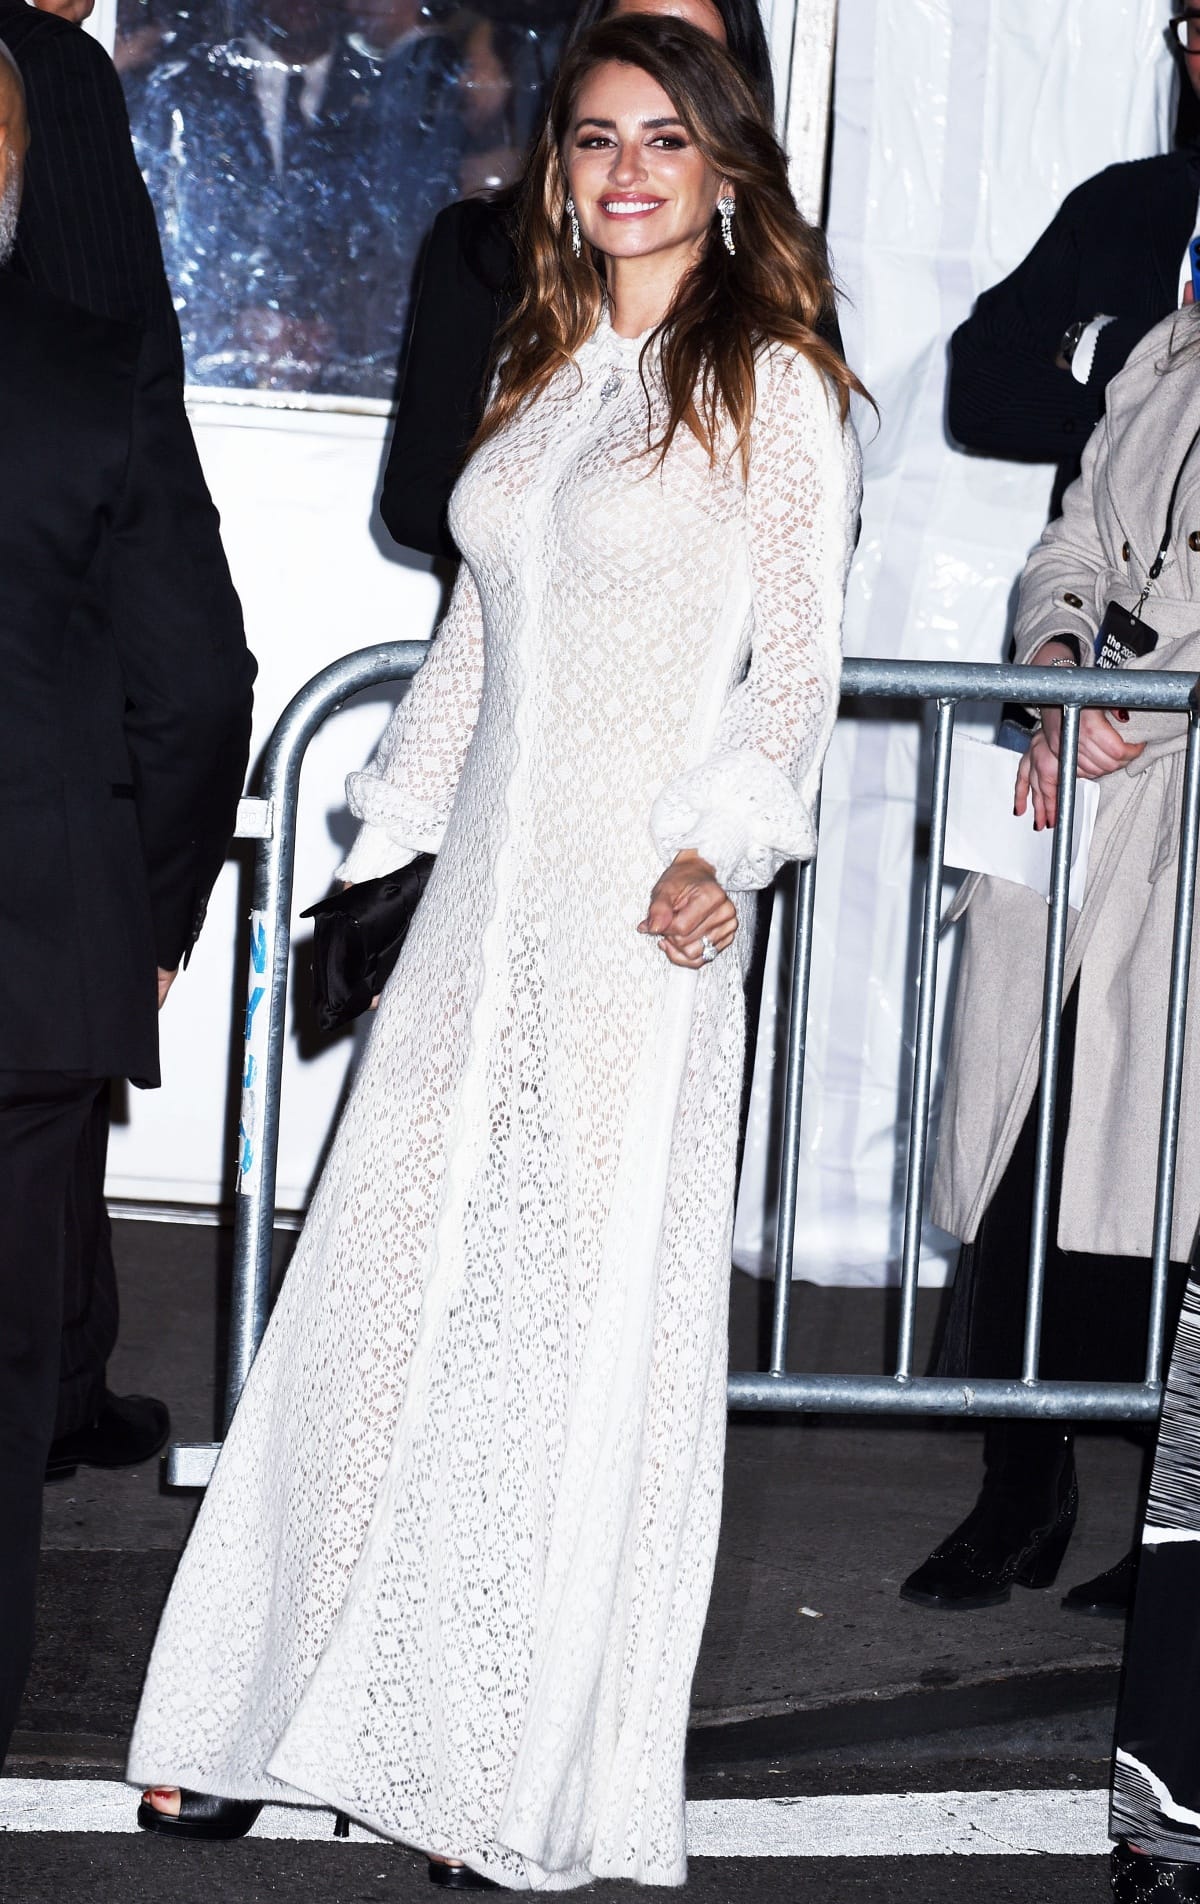 Penélope Cruz exuding elegance in a look from Chanel’s Fall/Winter 2023 Ready-to-Wear collection at the 2023 Gotham Independent Film Awards